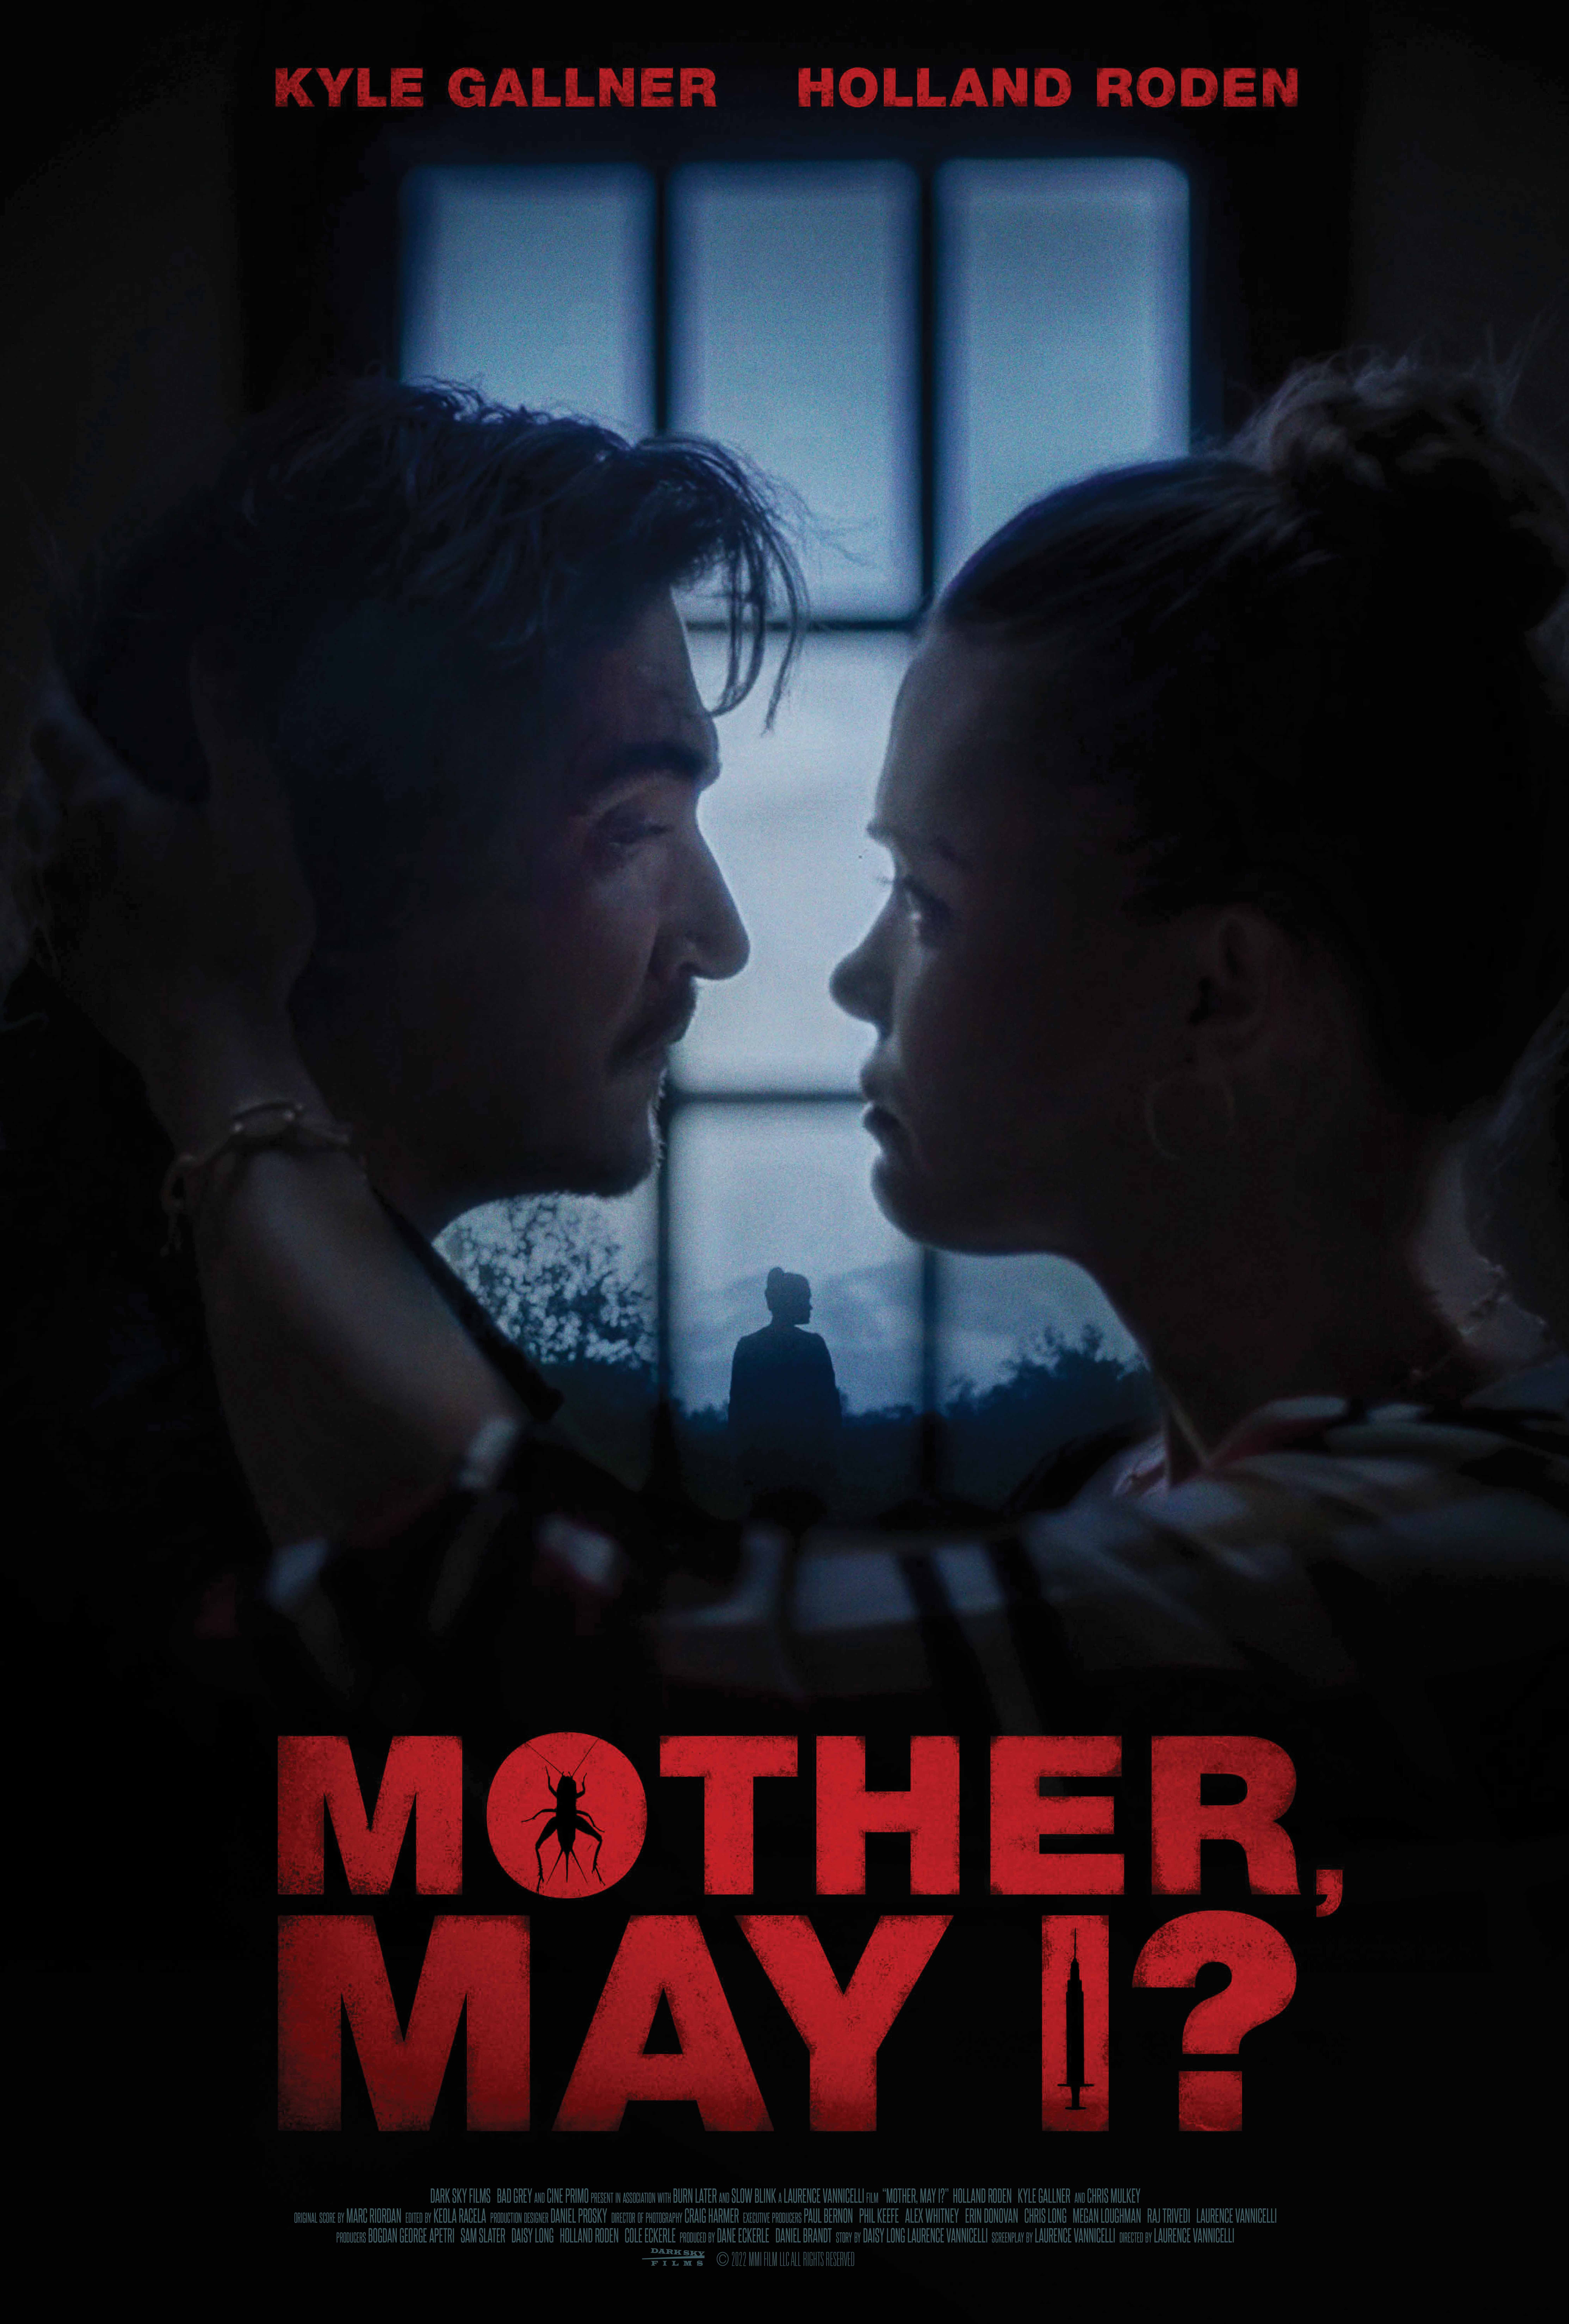 "Mother, May I?" - A Riveting Psychological Thriller Featuring Kyle Gallner and Holland Roden Set to Hit Theaters and VOD on July 21st 34